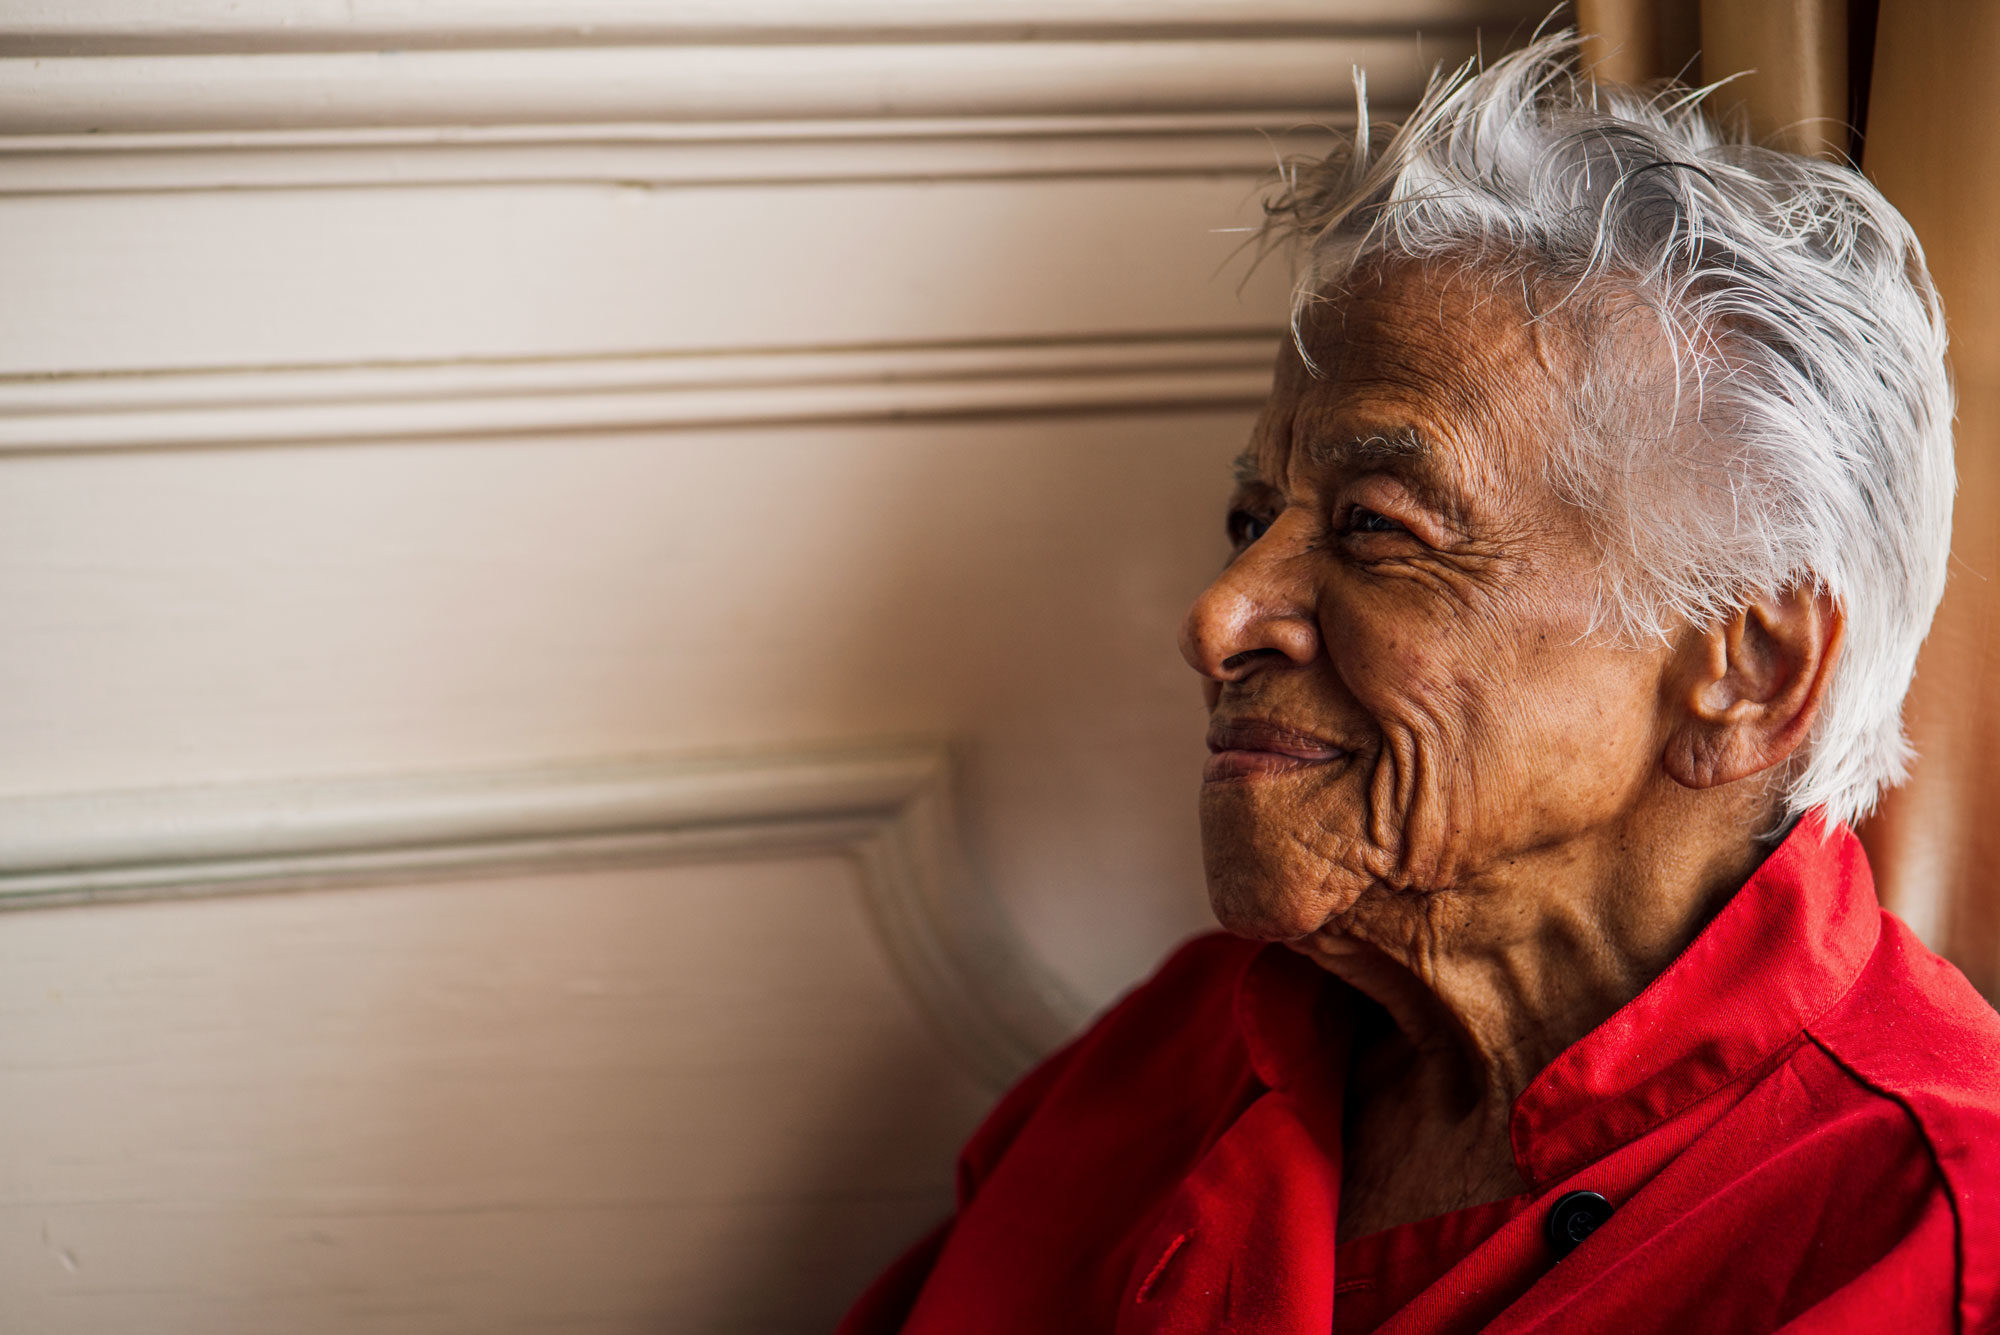 Leah Chase, African American Cuisine, Black Cuisine, African American Food, KOLUMN Magazine, KOLUMN, KINDR'D Magazine, KINDR'D, Willoughby Avenue, Wriit,